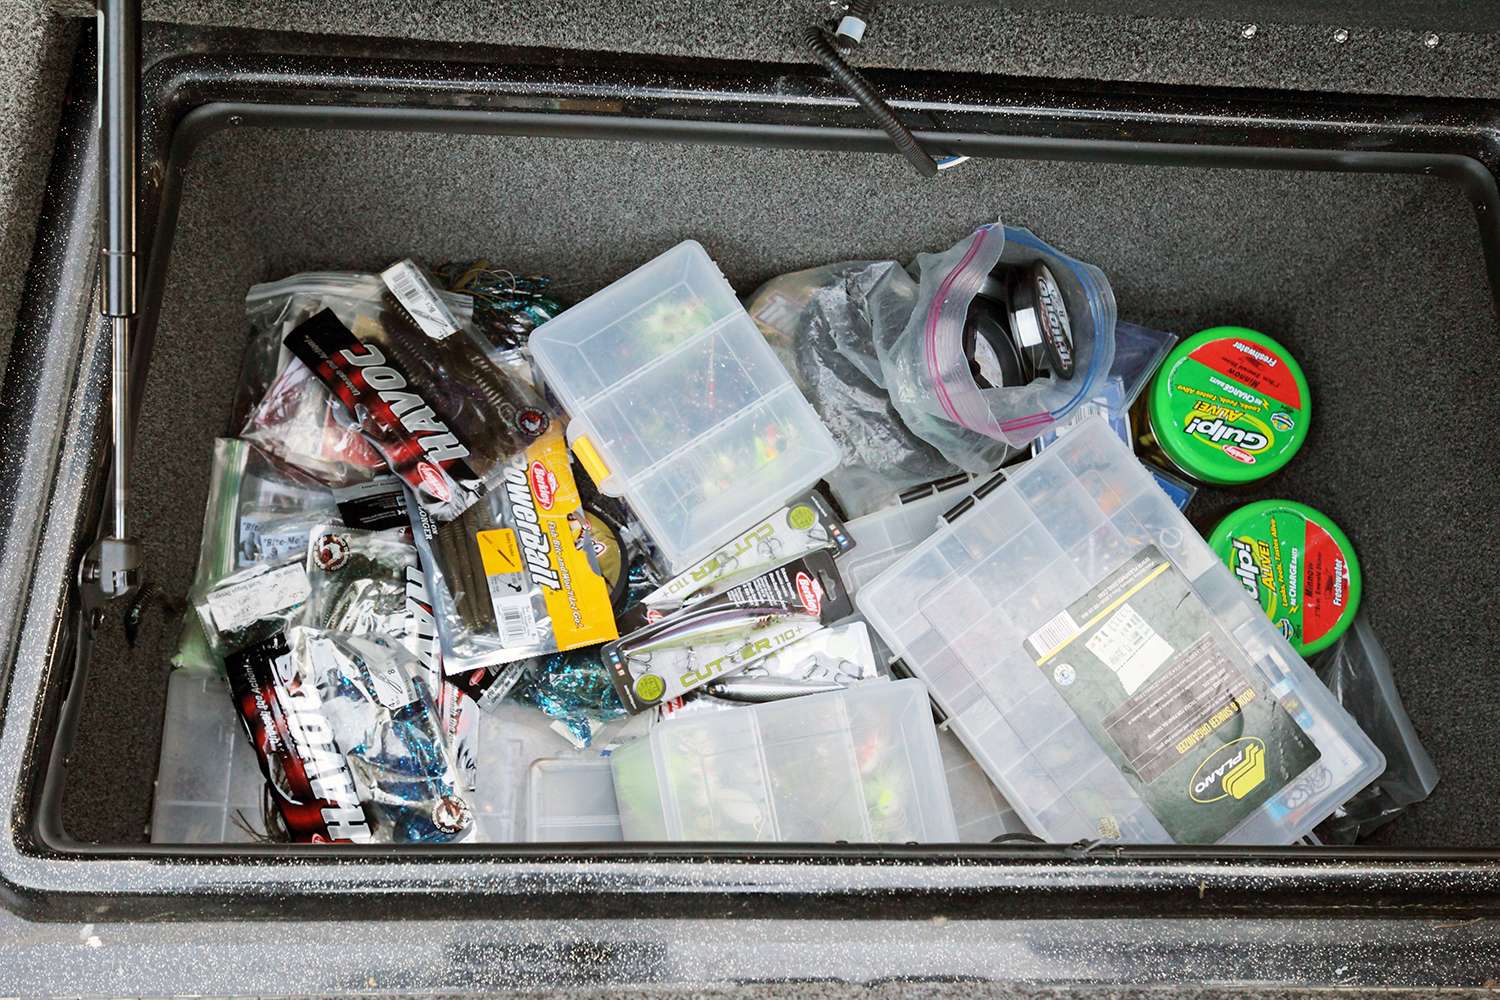 The boat's front box was a frequently used storage space that held a wide array of fishing gear. Plastics, spinnerbaits, weights, line and Gulp! baits were all included.